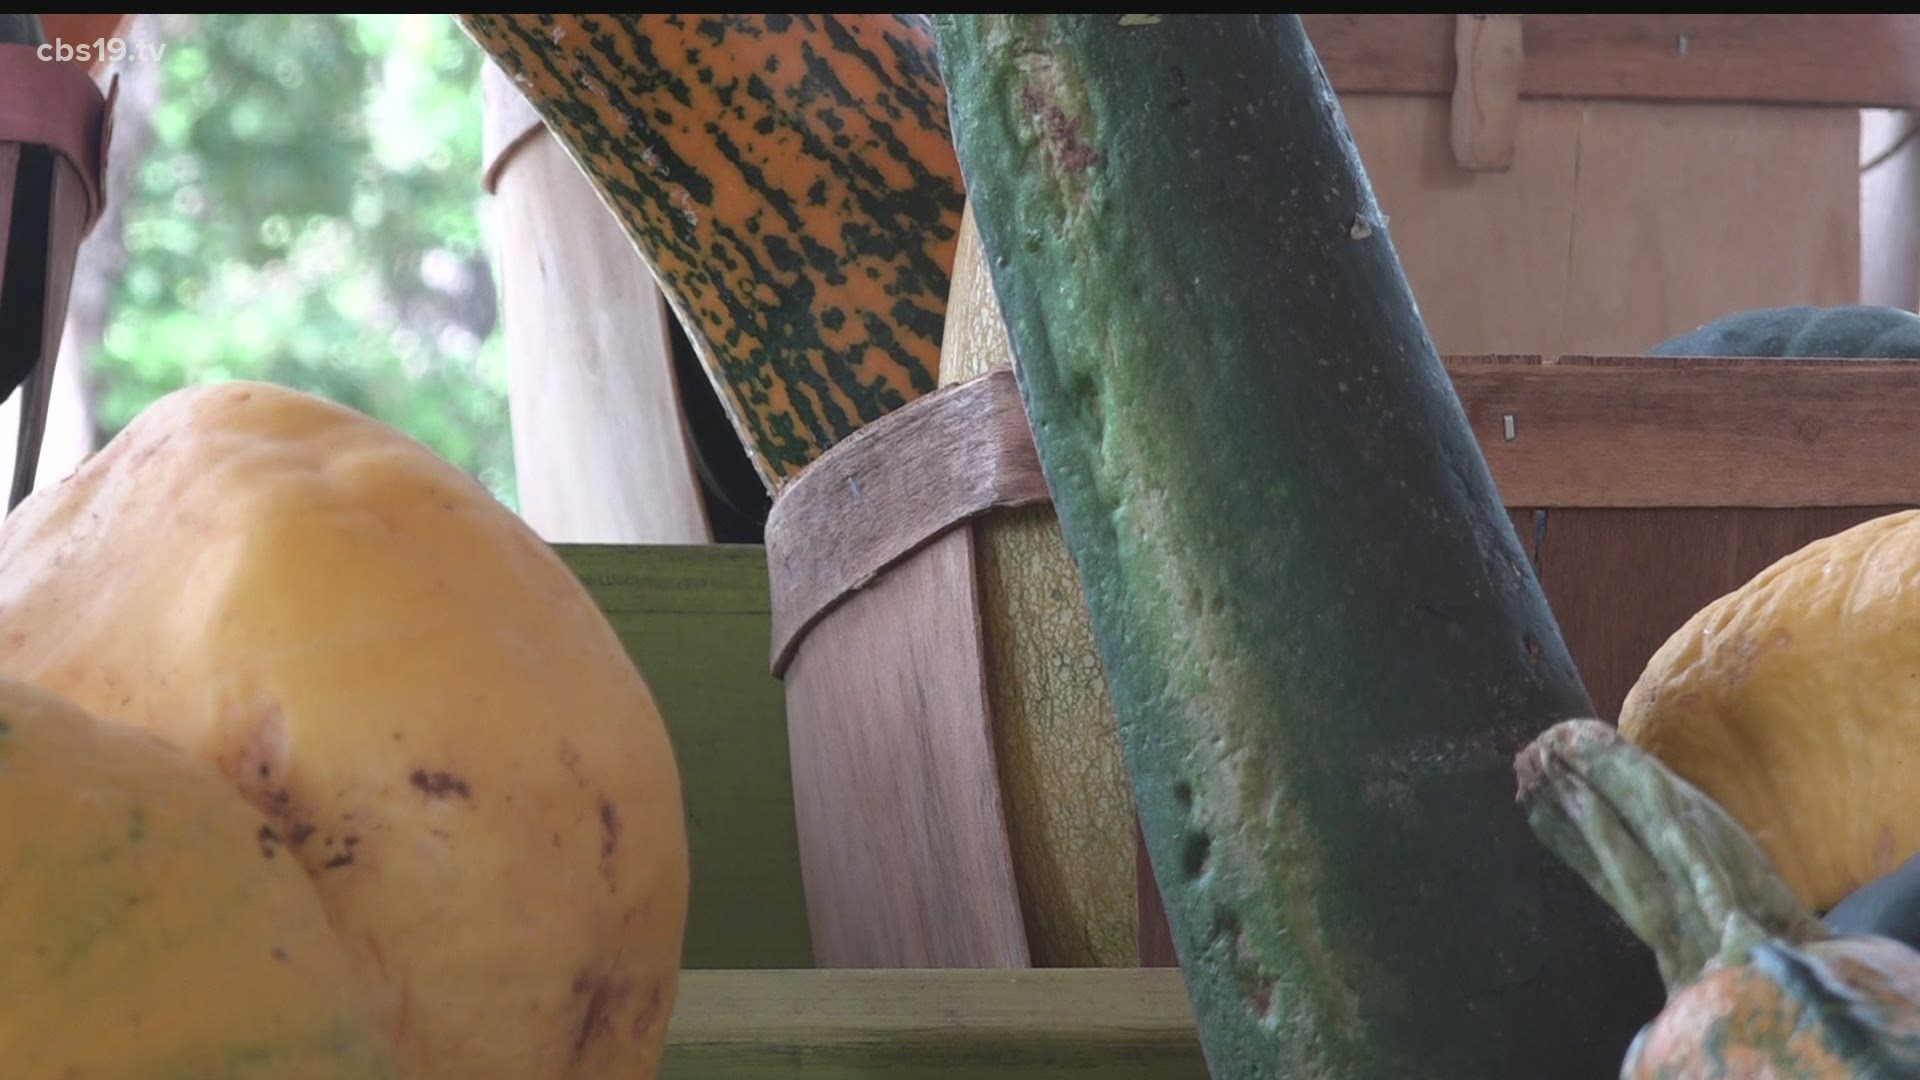 Farmers say the winter storm and May showers have shortened the harvest season by more than a month.